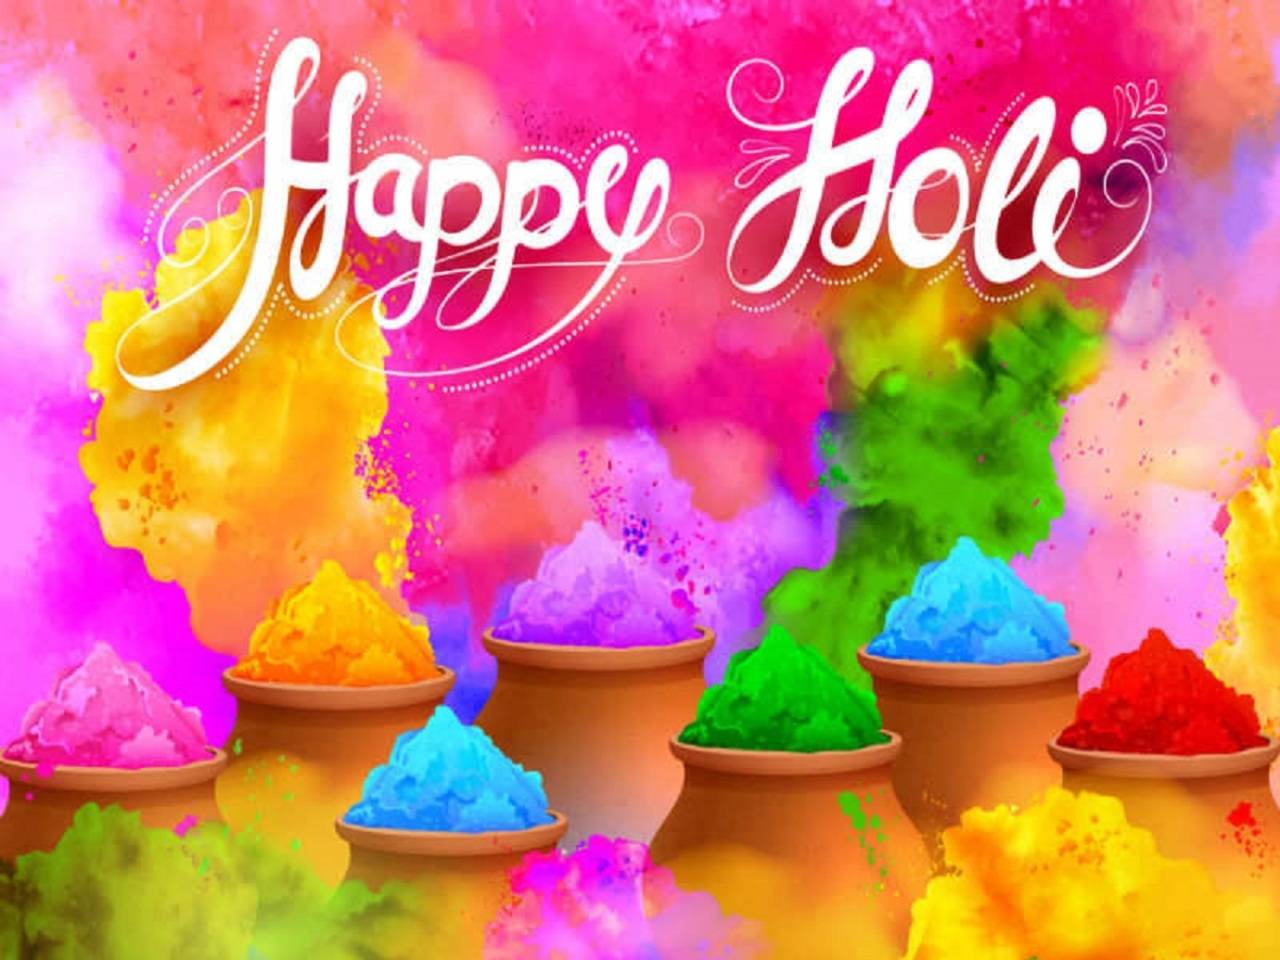 Amazing Collection of Full 4K Holi Images 2020 – Over 999+ Top Holi Images